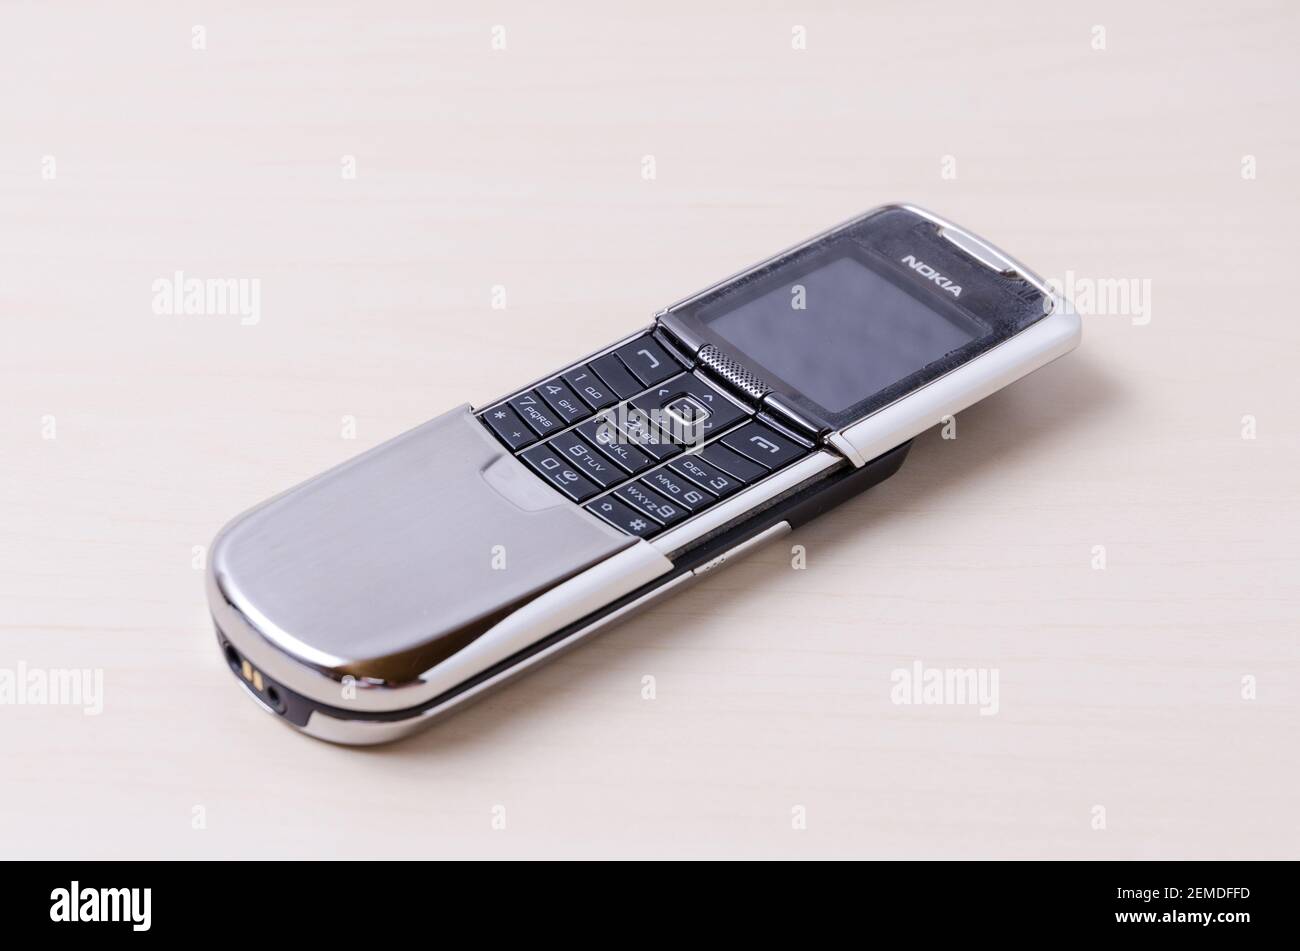 Nokia 8800 stainless-steel slider mobile or cell phone from 2005 on bright  wooden background or desk, close-up, indoors Stock Photo - Alamy